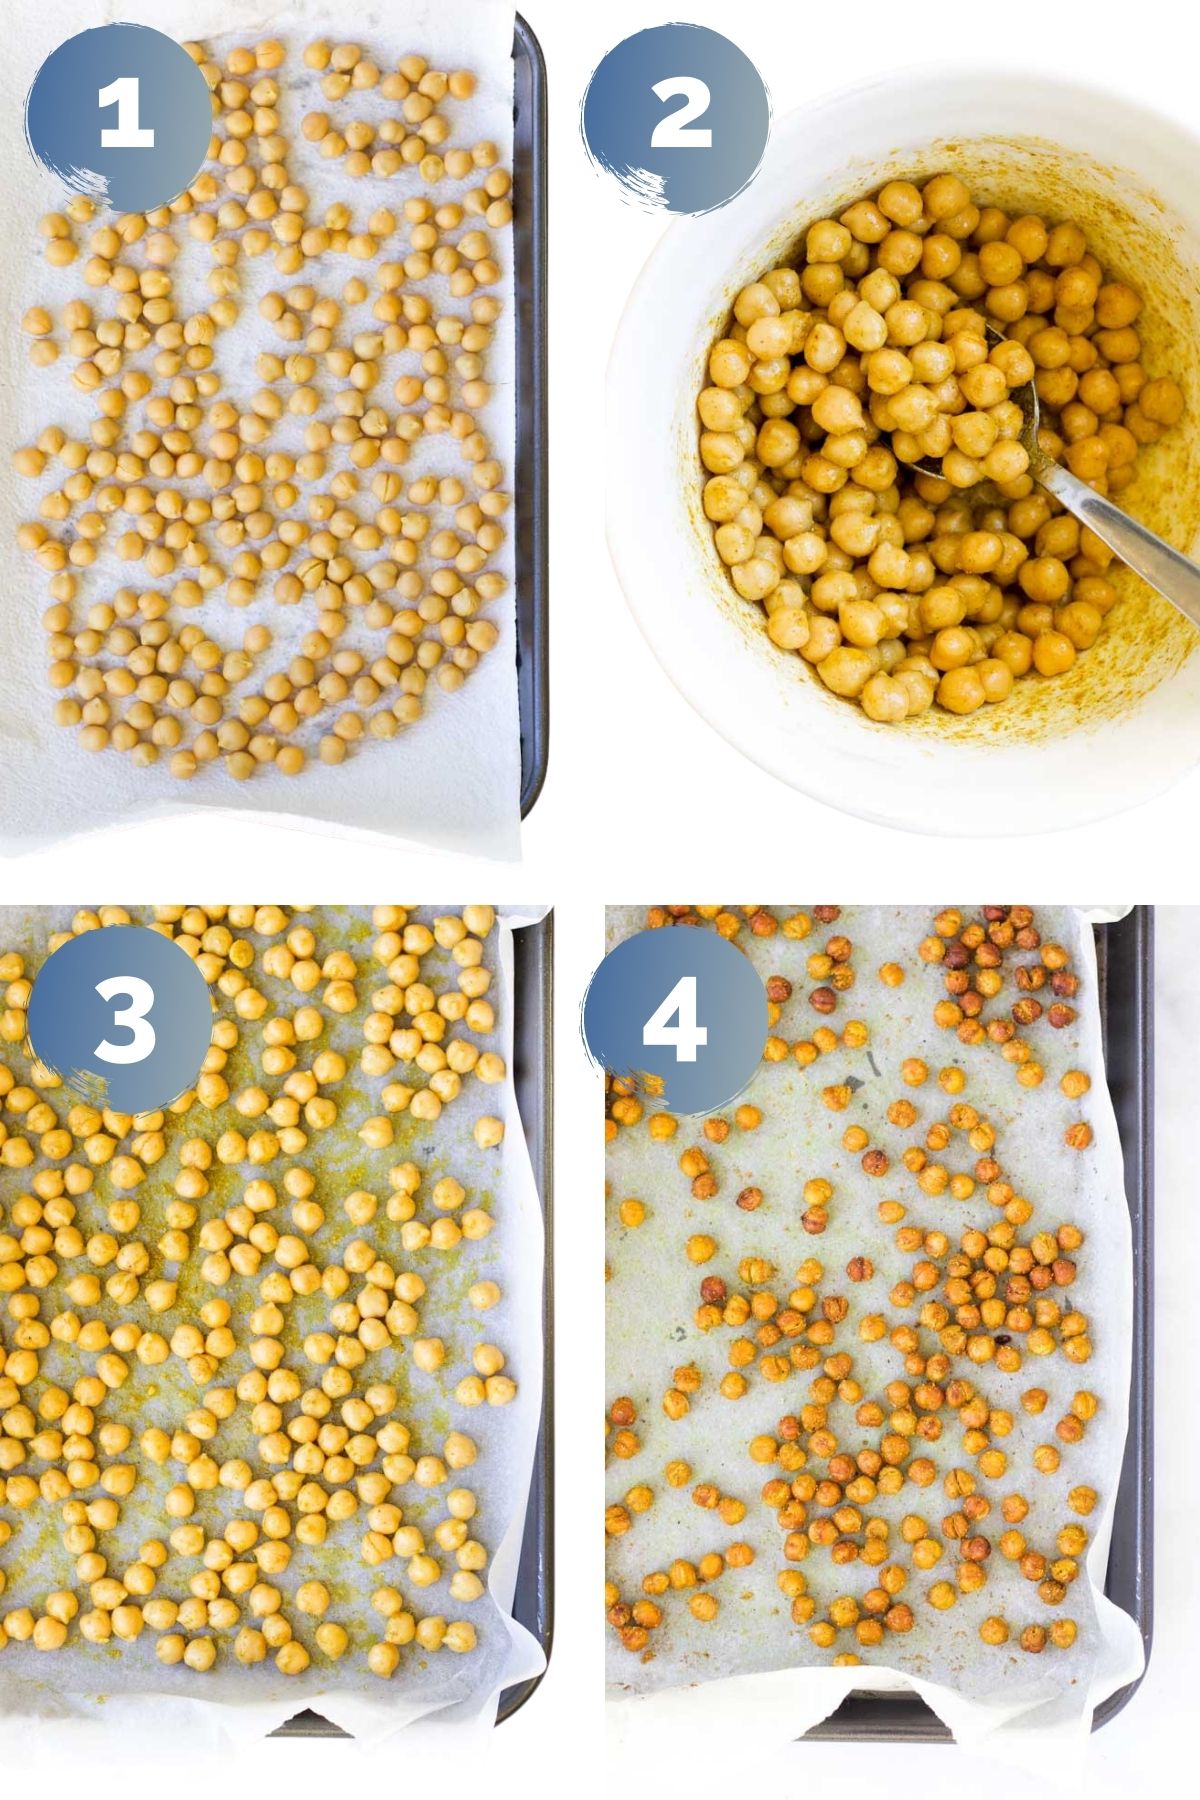 Collage of 4 Images Showing Different Process Steps to Making Baked Chickpeas